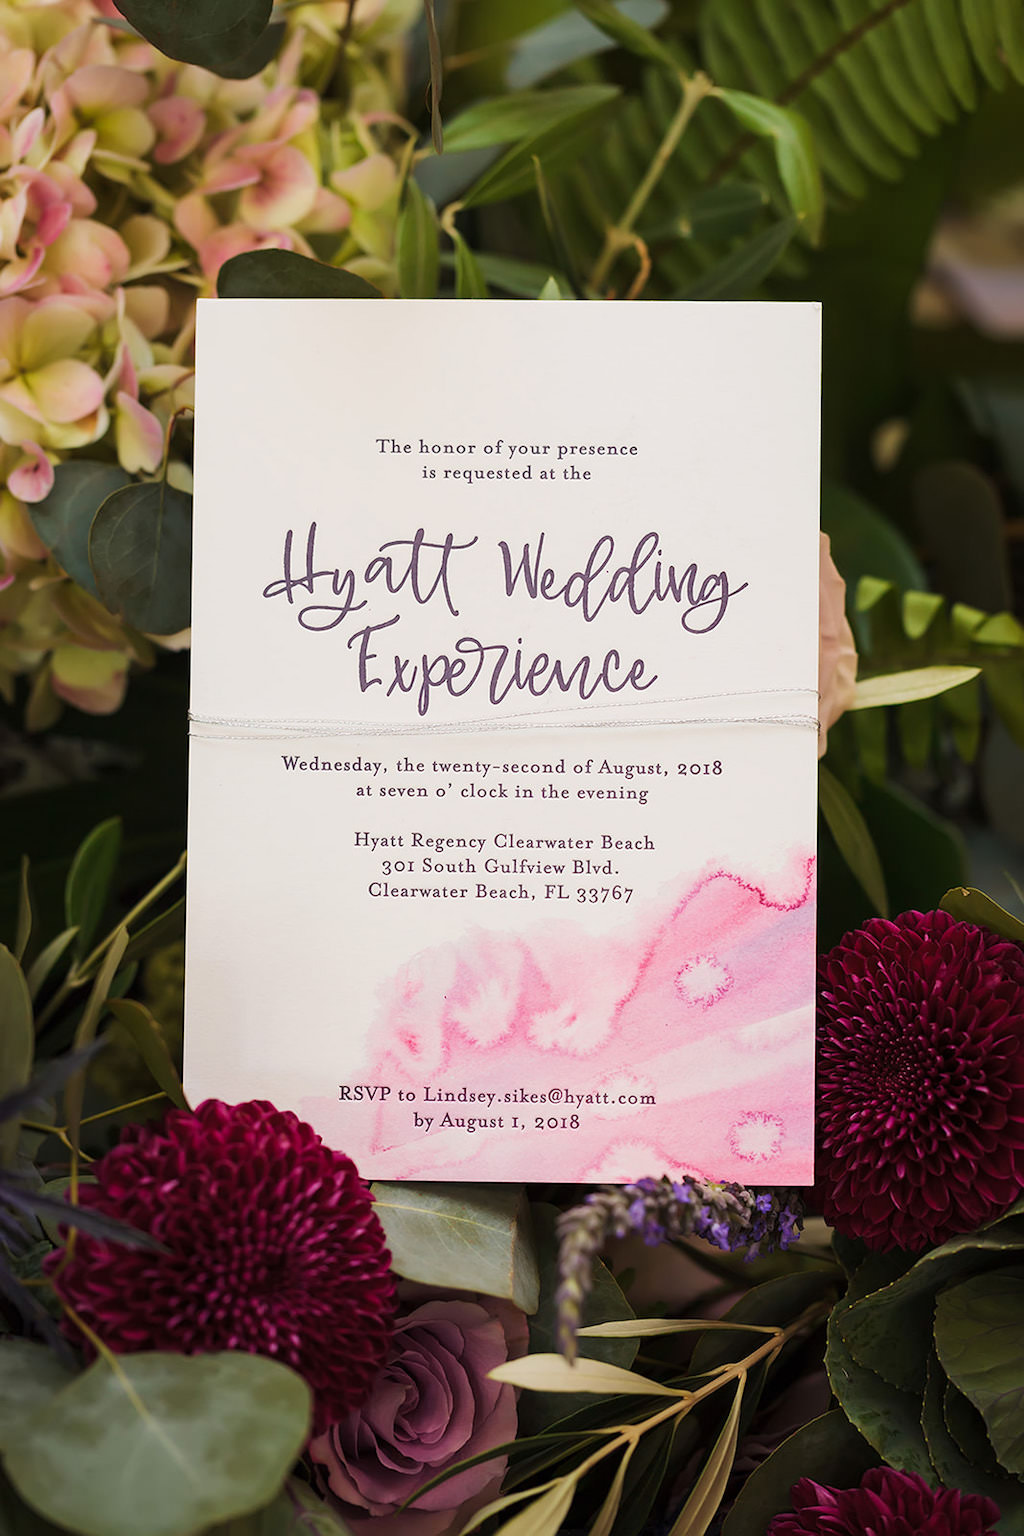 White and Pink Watercolor Letterpress Wedding Invitation | Clearwater Beach Stationary A&P Designs | Hyatt Wedding Experience